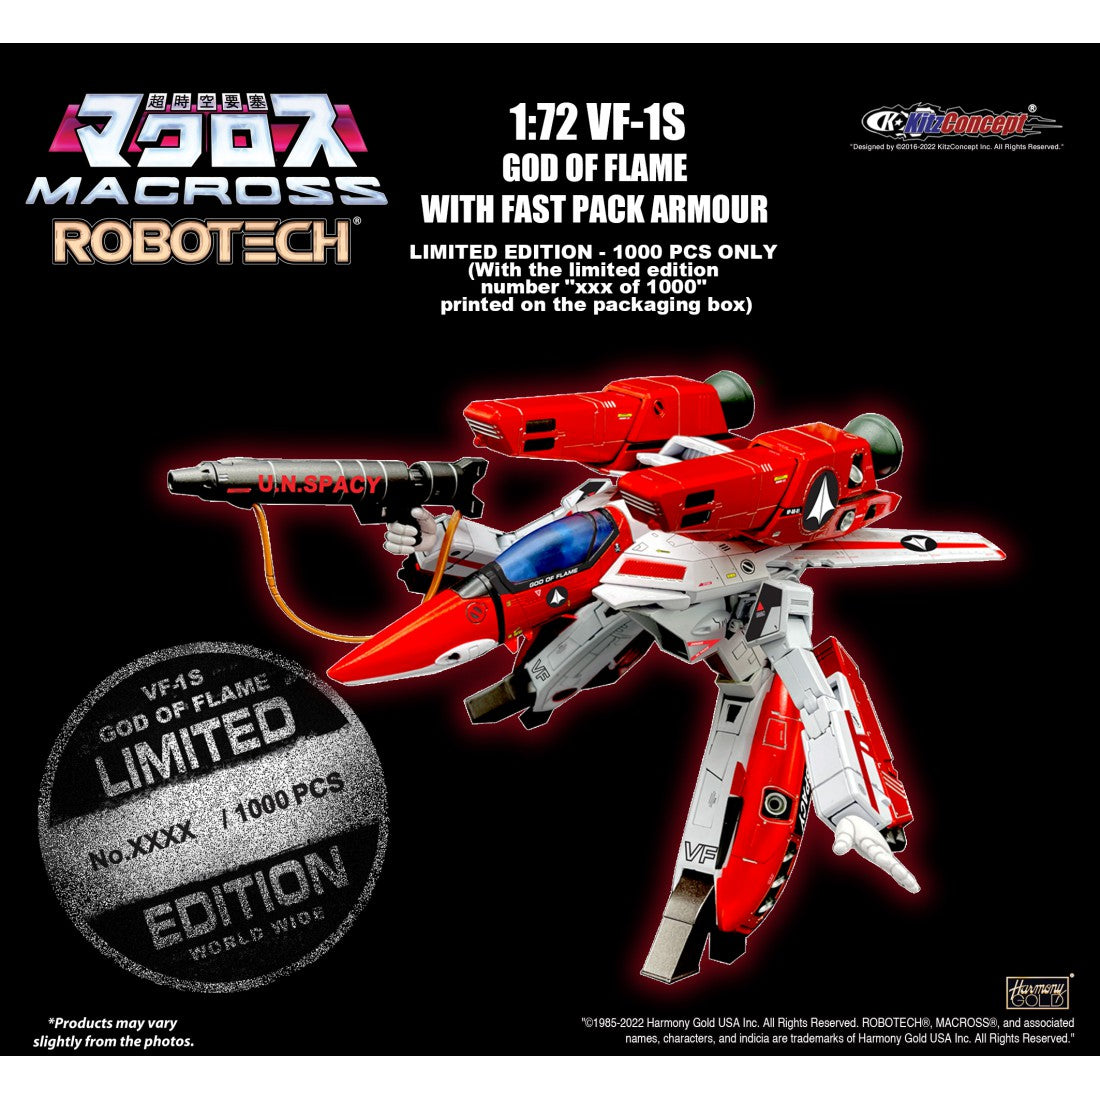 KitzConcept - Macross (Robotech) - 1/72 Scale Veritech Fighters - VF-1S God of Flame with Fast Pack Armour (Limited Edition) - Marvelous Toys